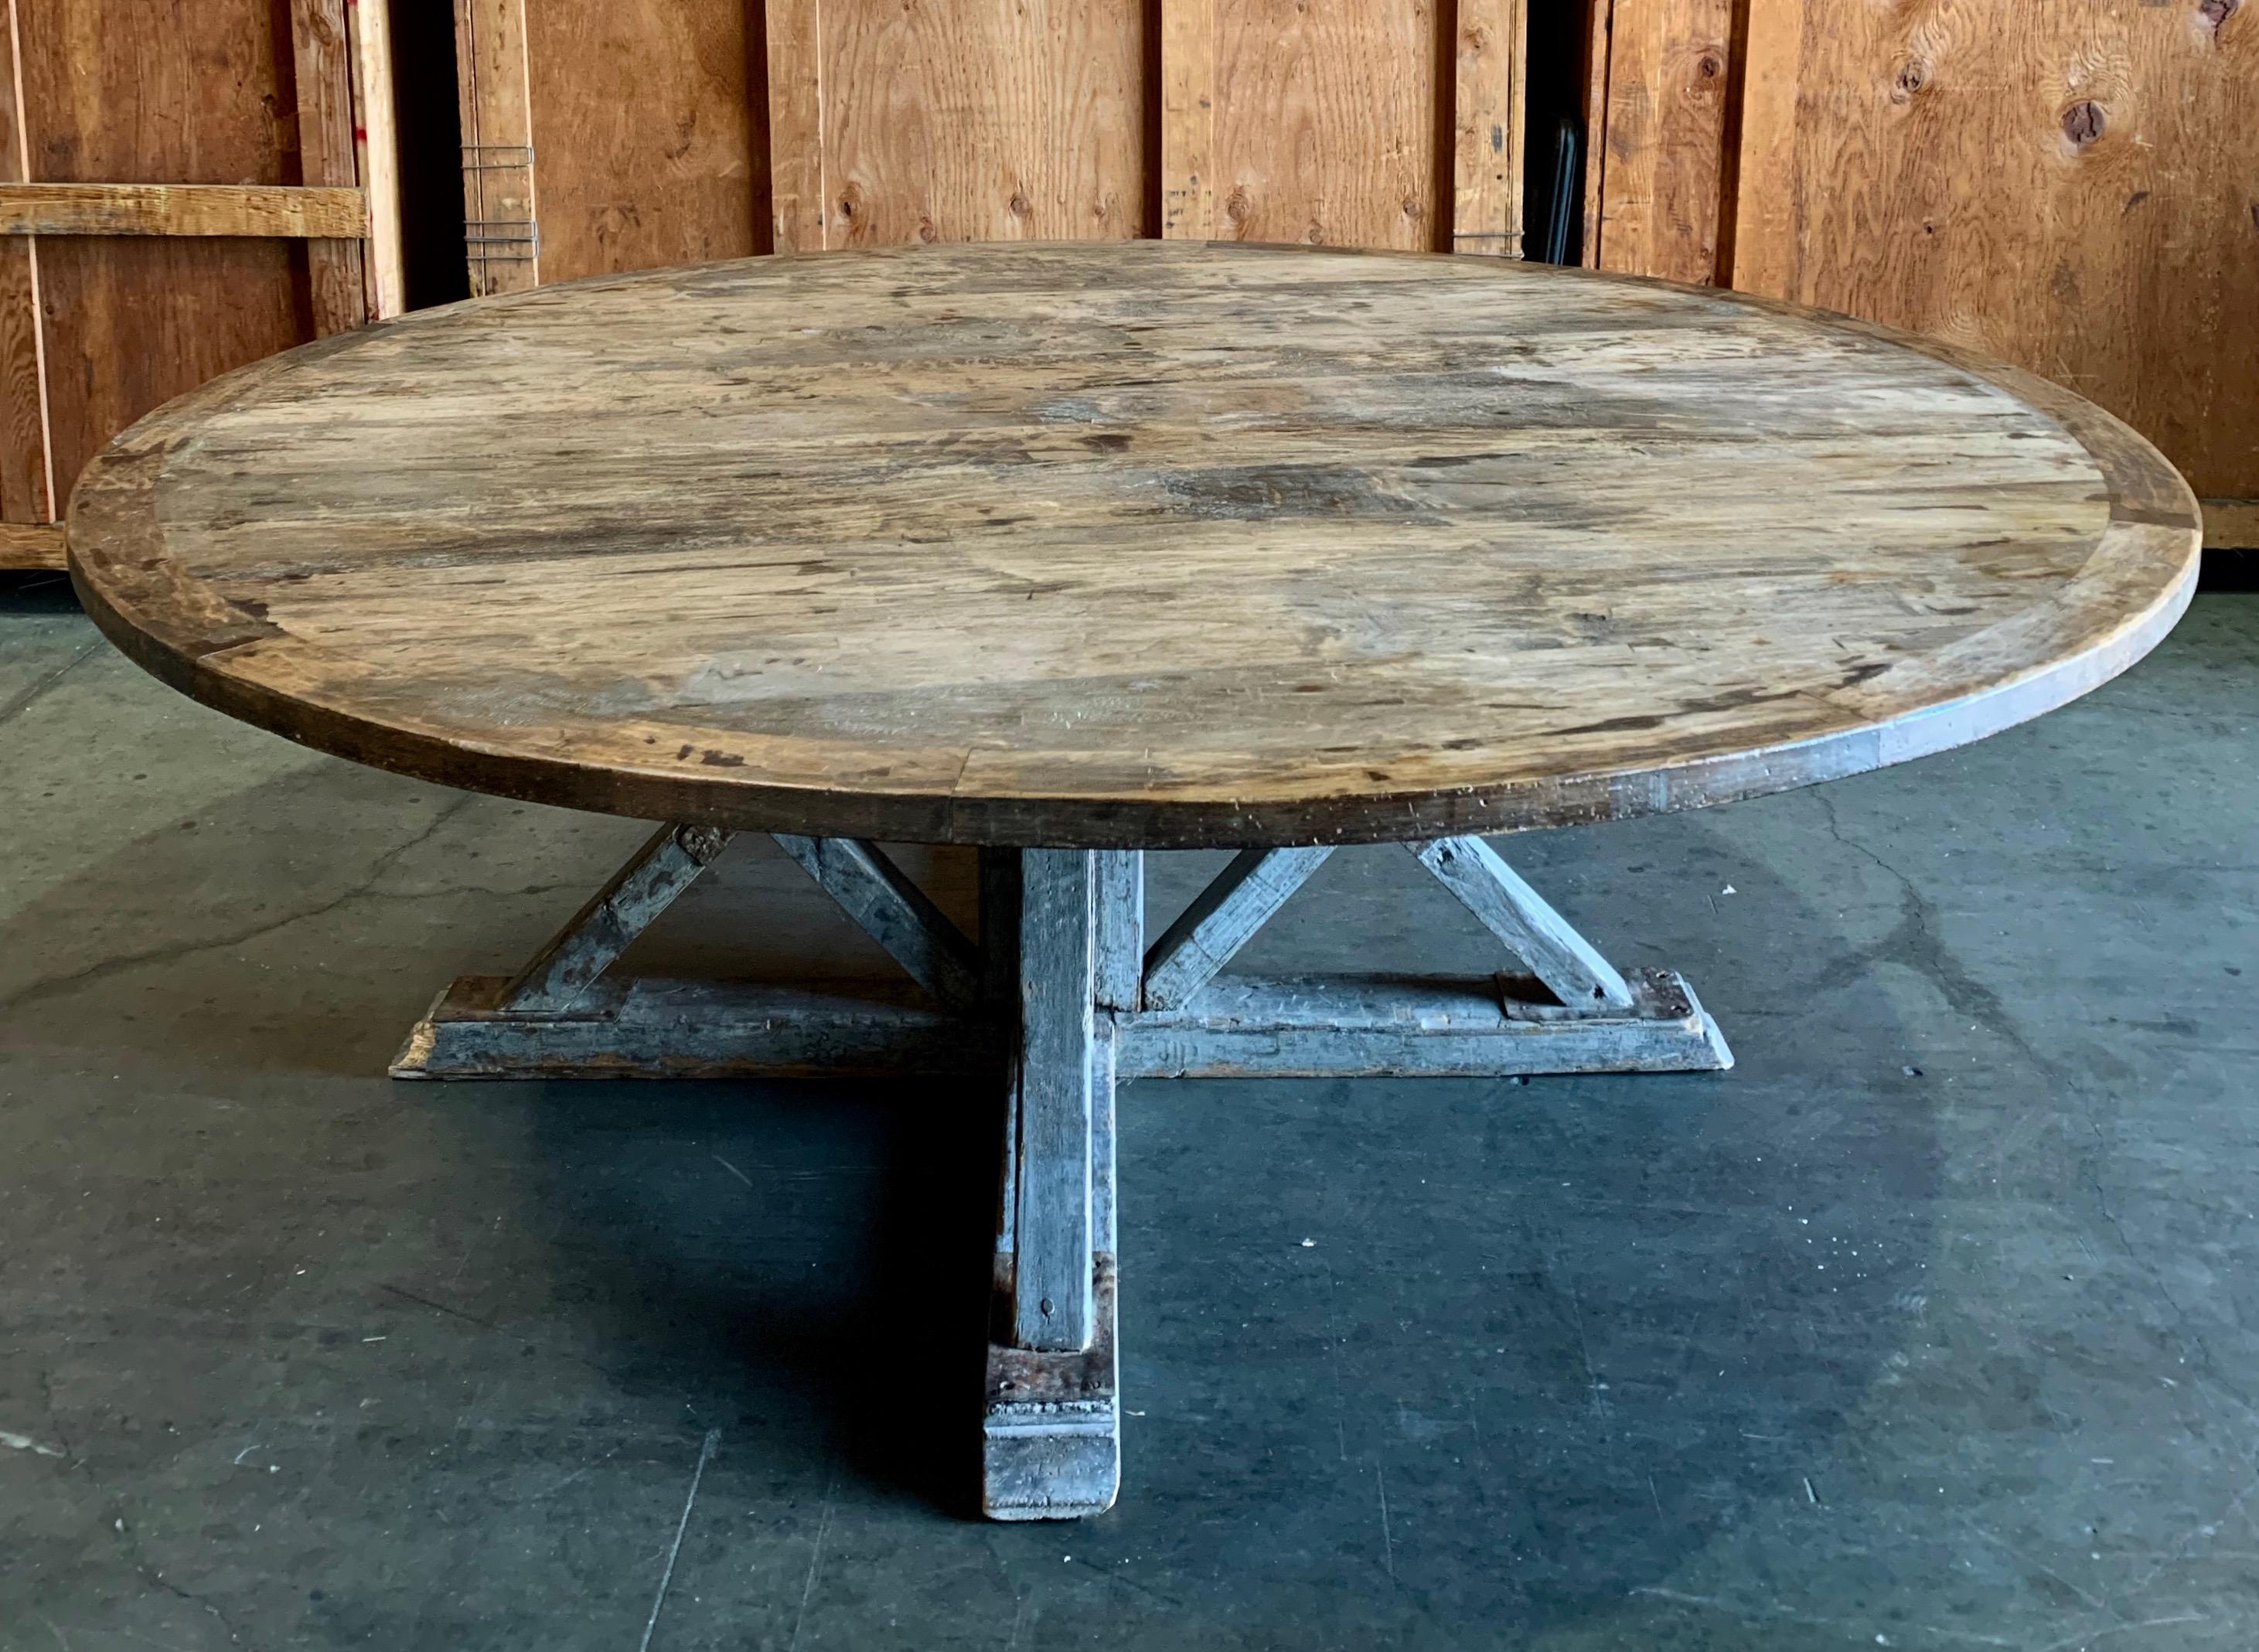 Grand, large round wooden dining table with antique base and new weathered top amply seats 8-10.